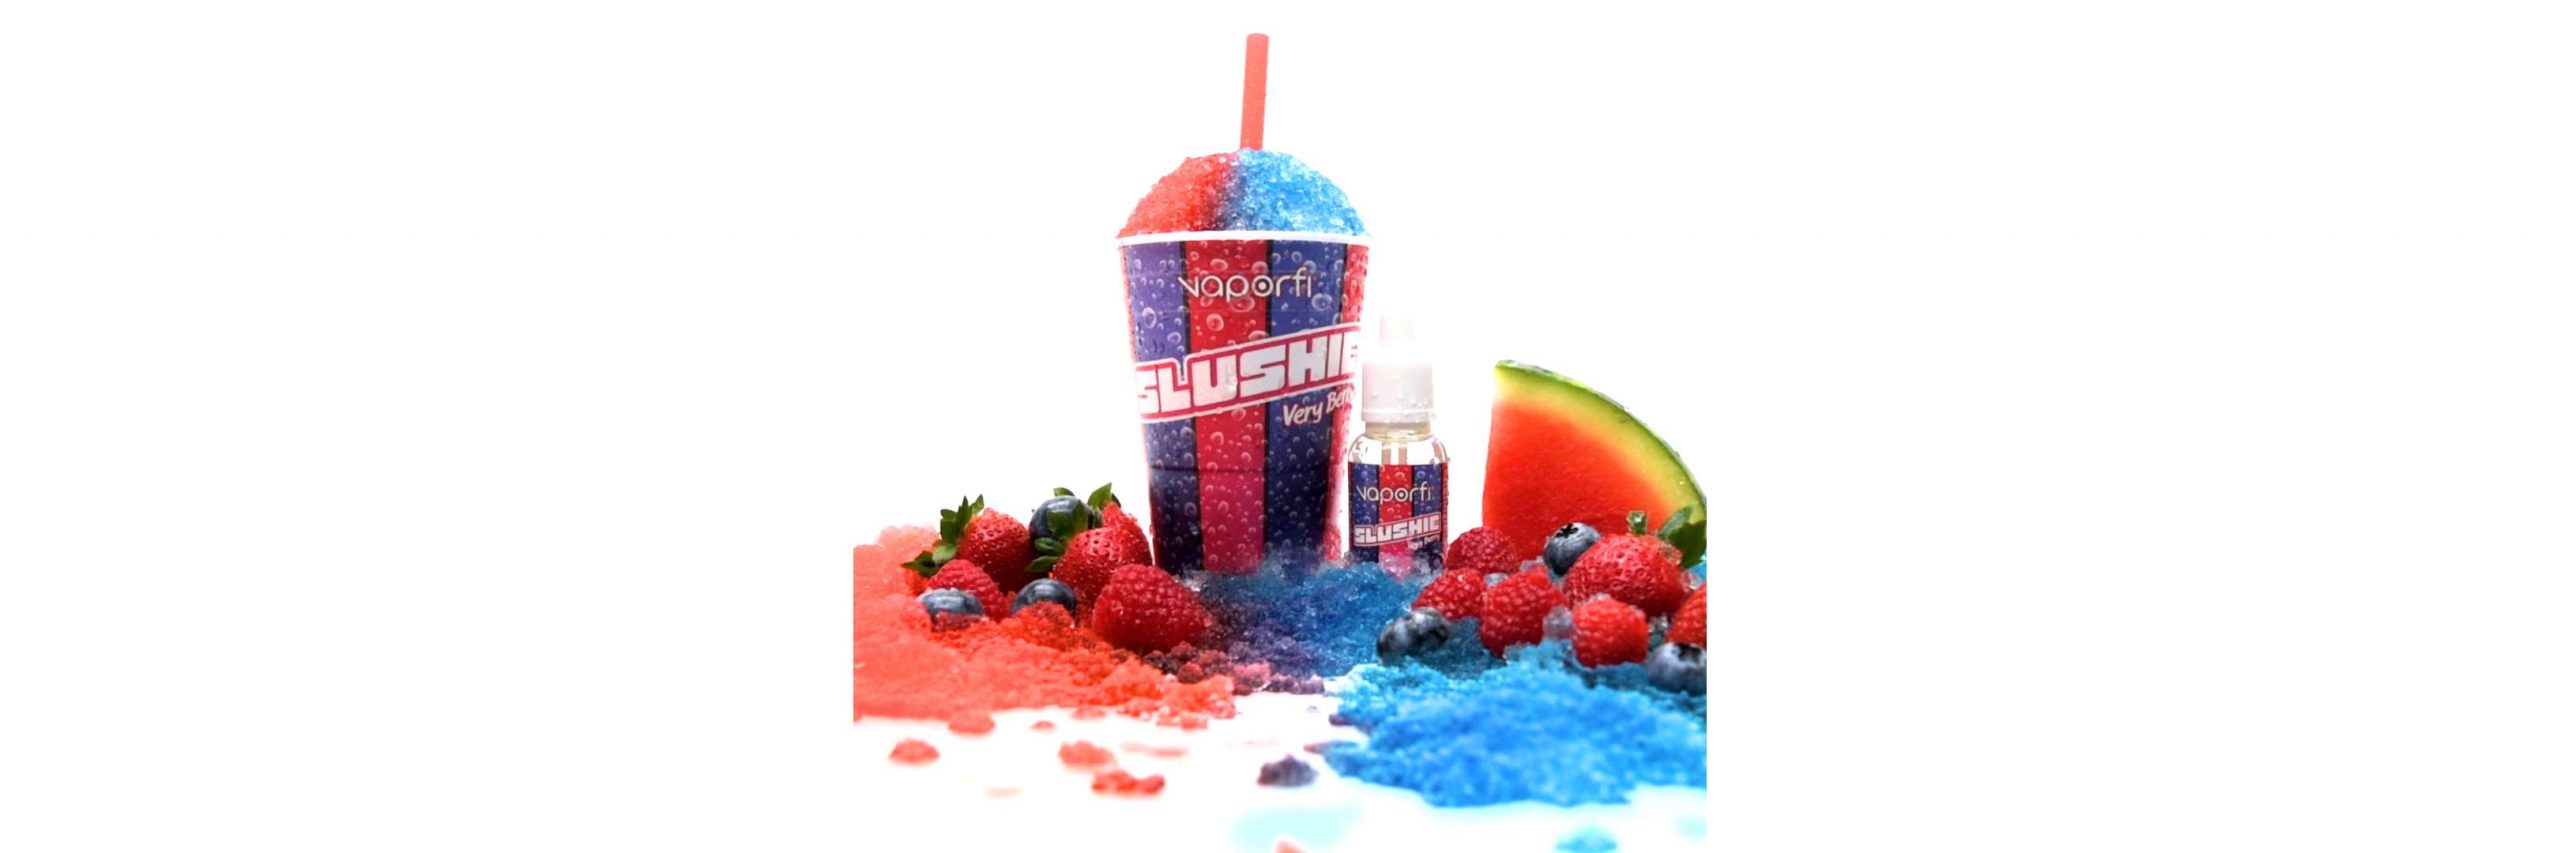 Announcing Very Berry Slushie